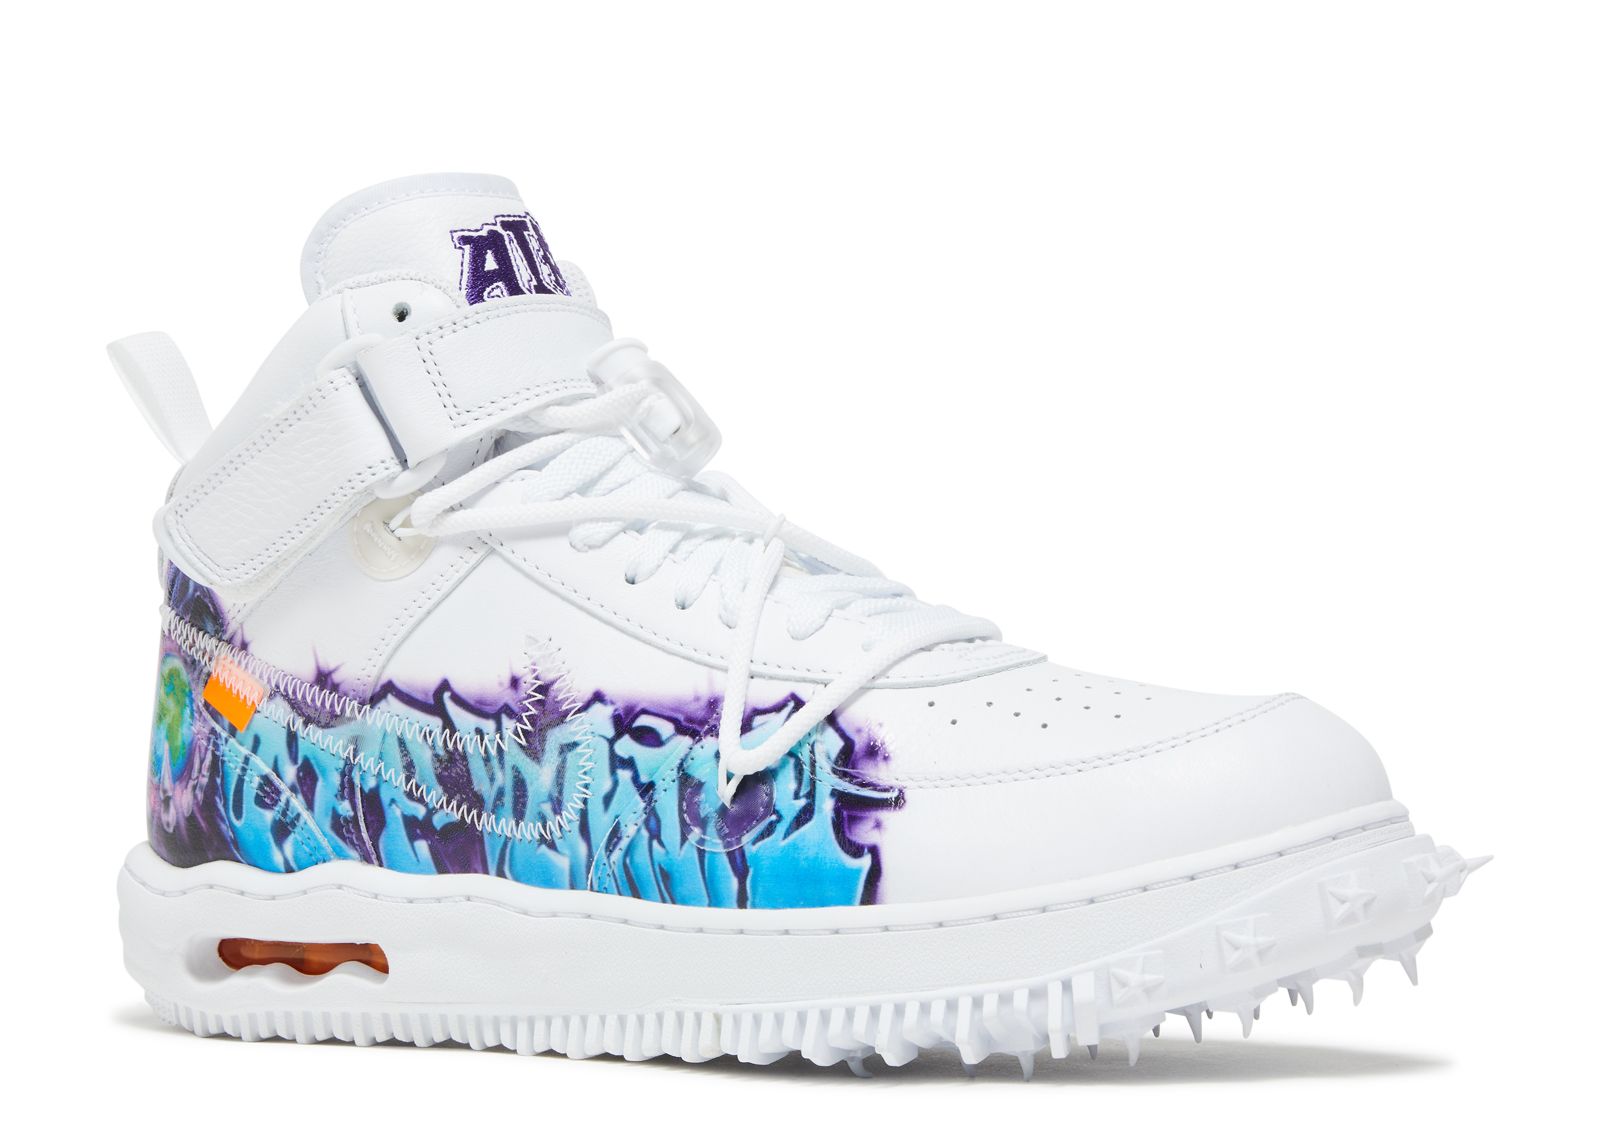 Nike Air Force 1 Mid Off-White - Graffiti White Shoes - Size 11 - White/clear-white